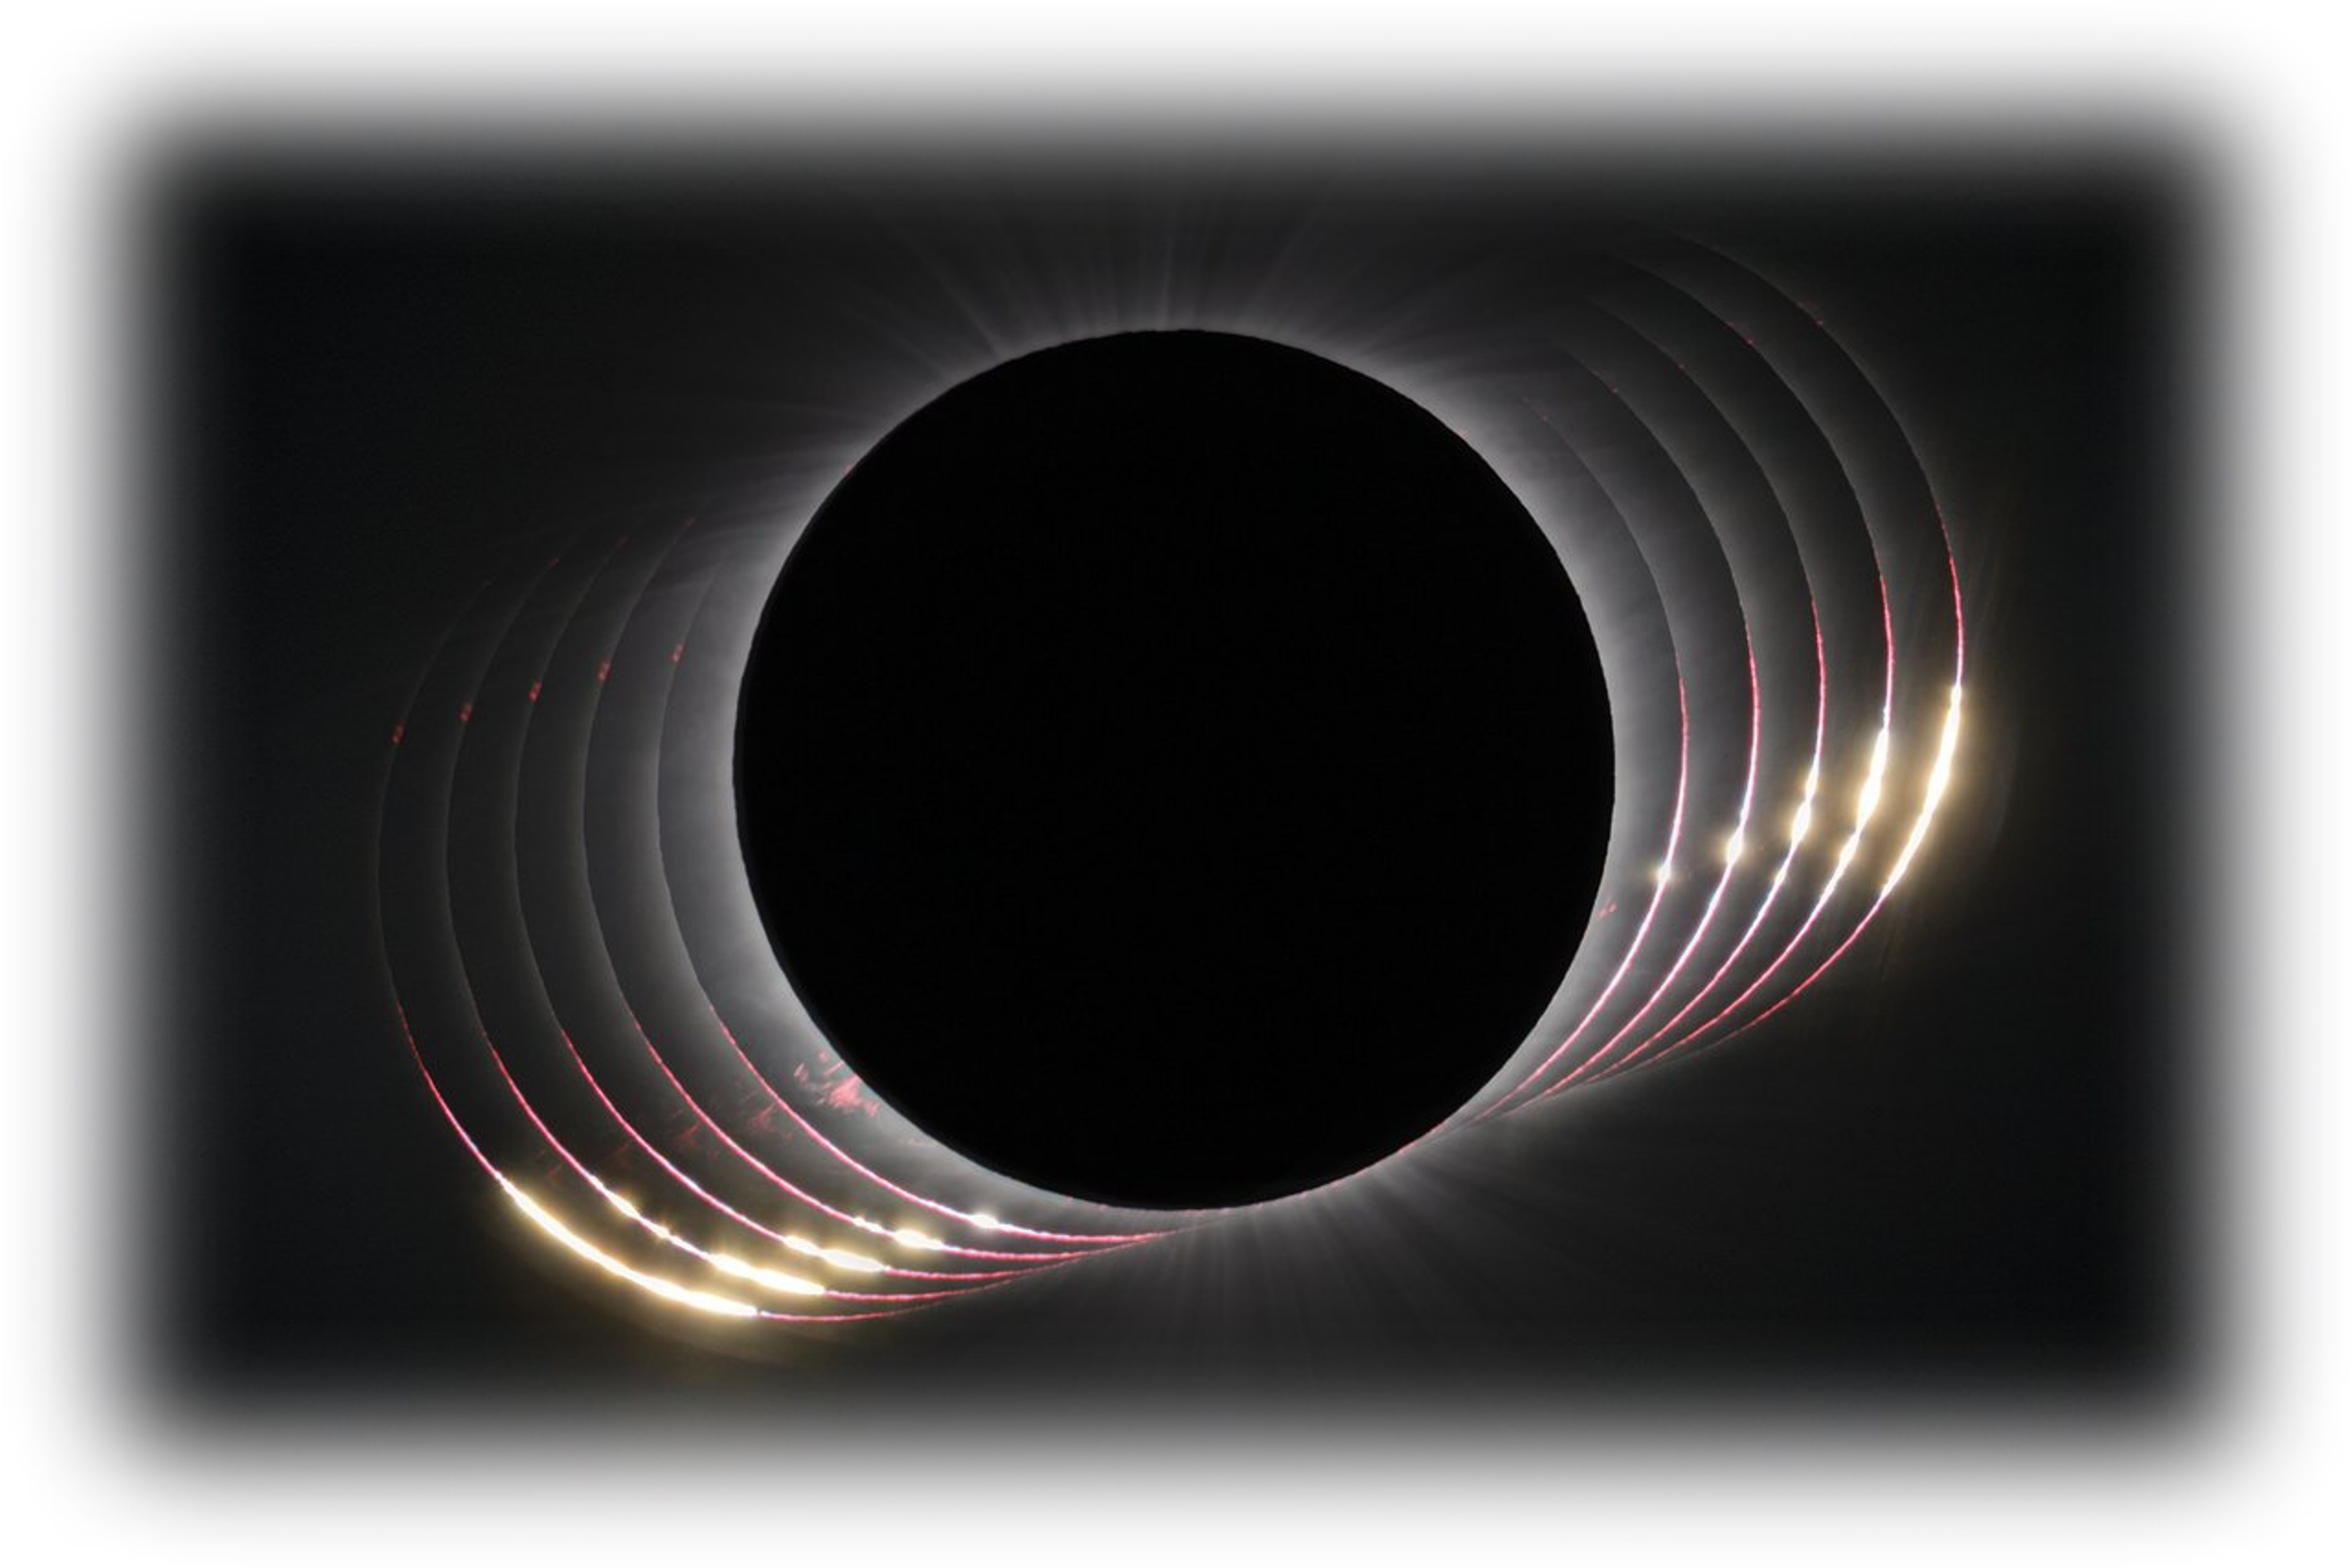 A dark circle in the center with color slivers of light show the movement of the sun during the eclipse.